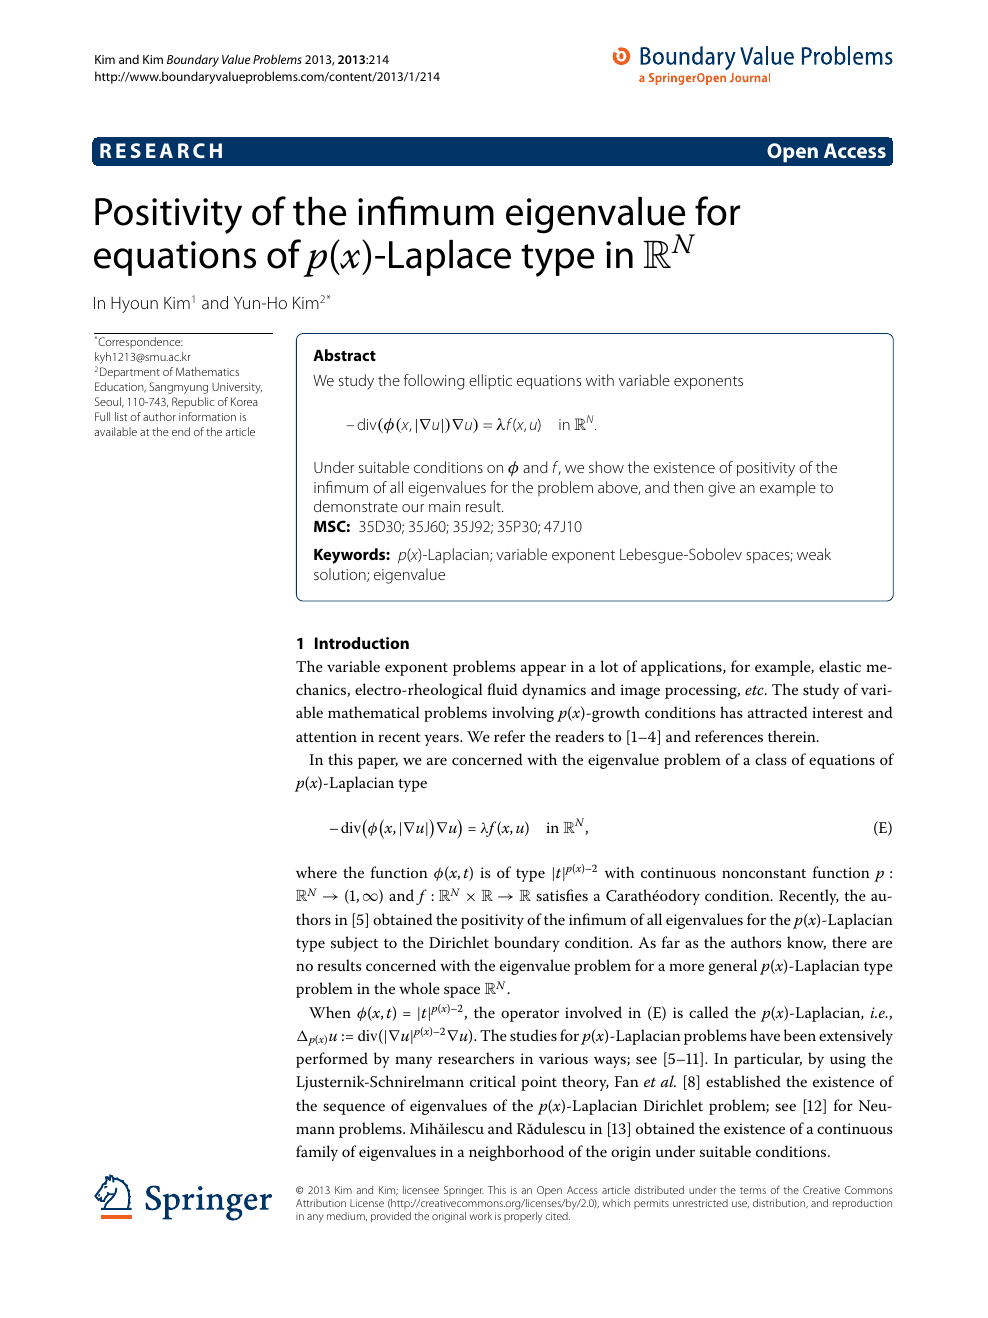 Positivity Of The Infimum Eigenvalue For Equations Of P X Laplace Type In Rn Topic Of Research Paper In Mathematics Download Scholarly Article Pdf And Read For Free On Cyberleninka Open Science Hub